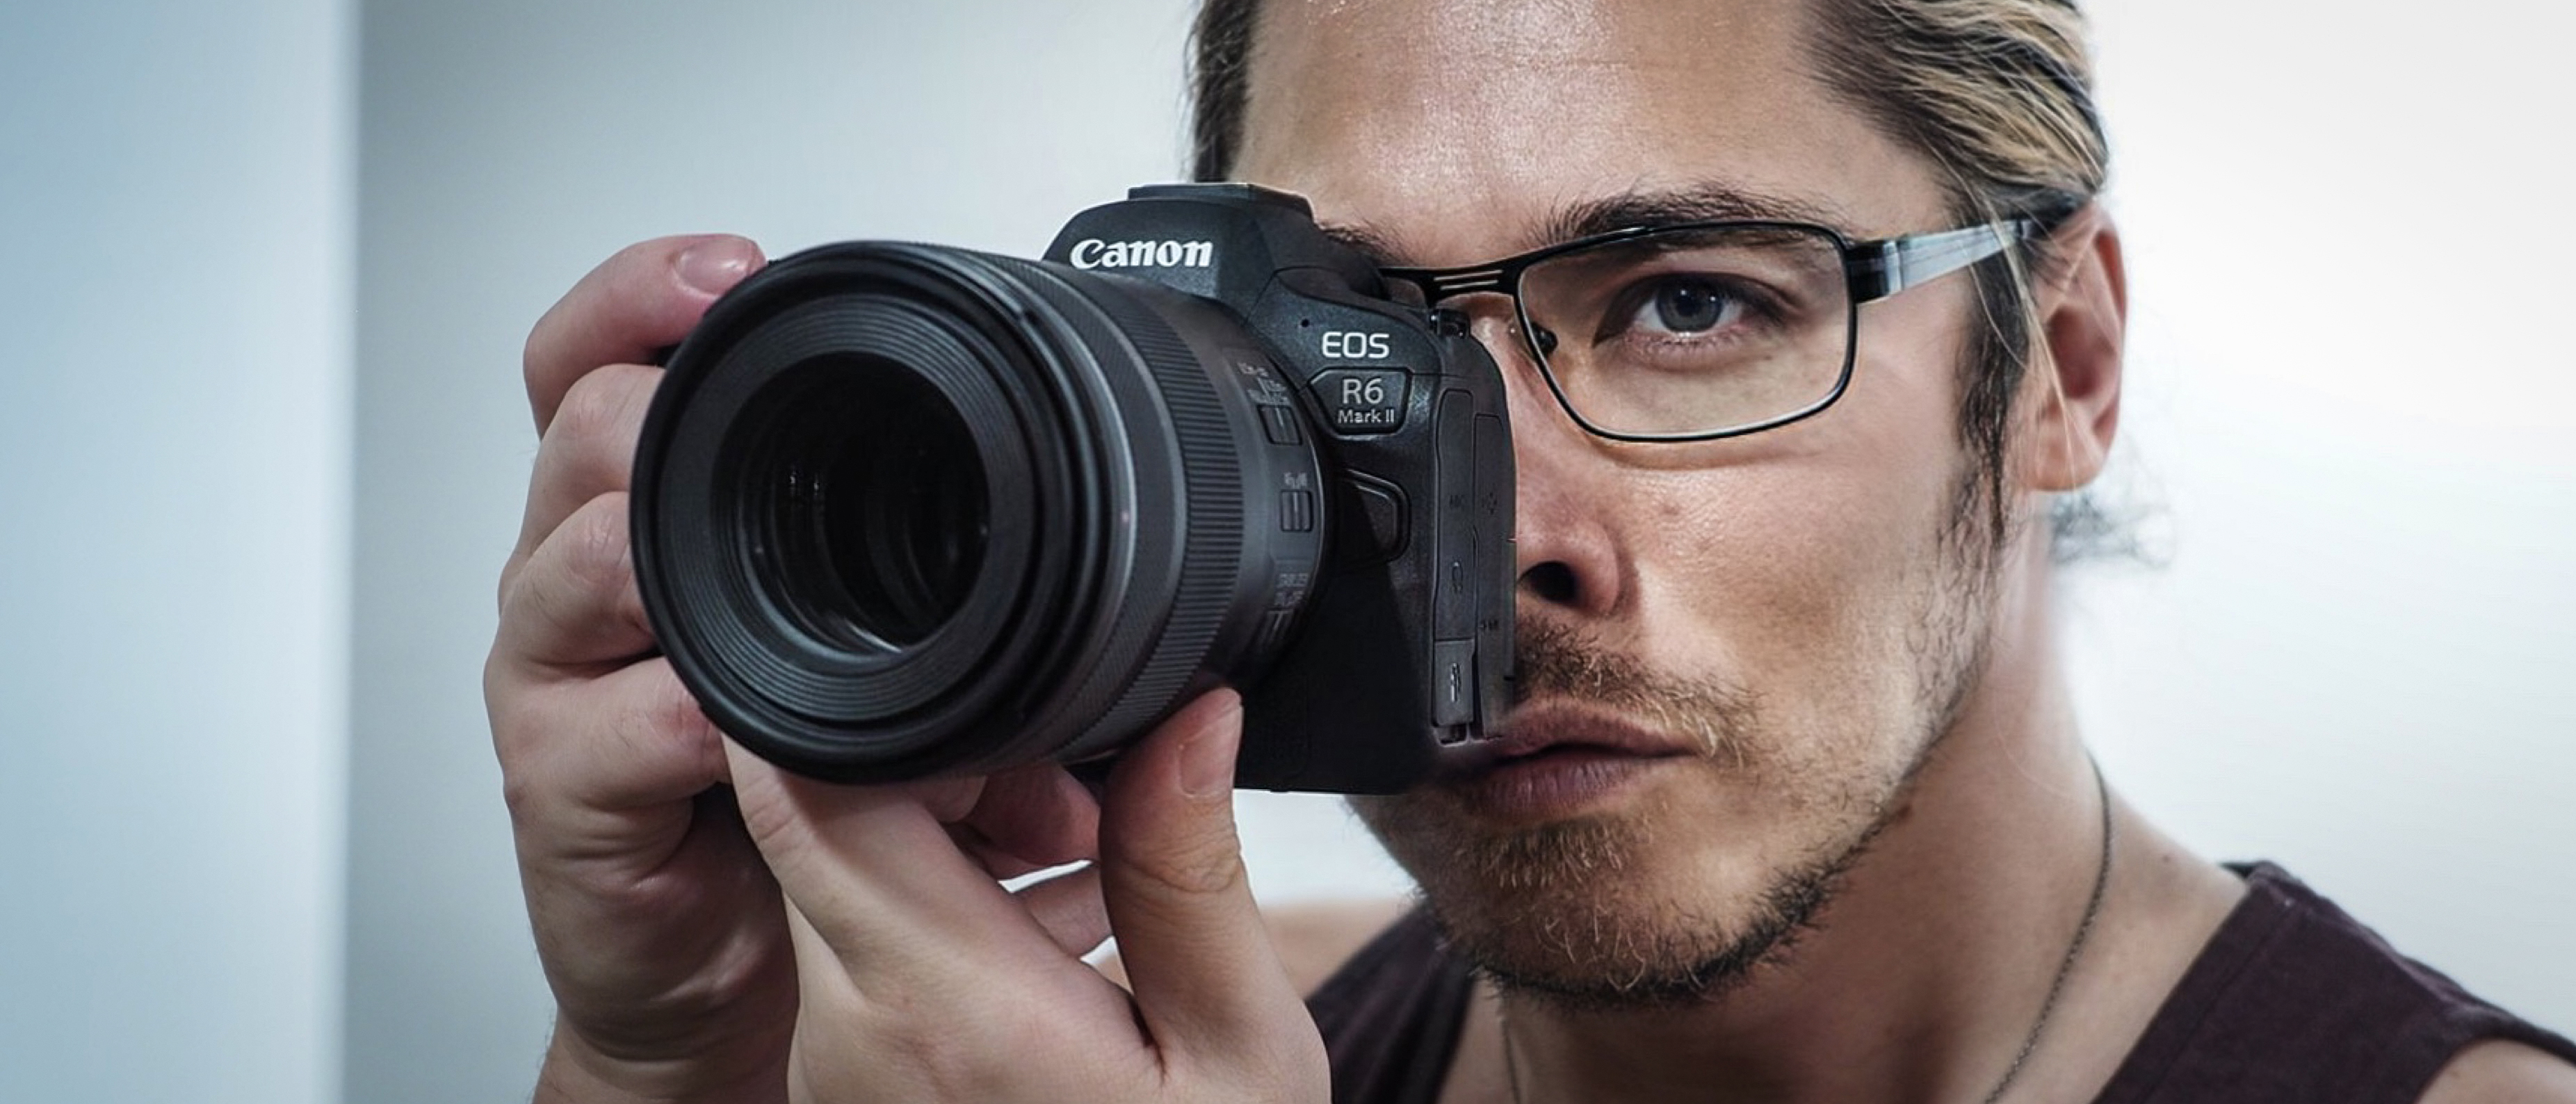 Canon R6 Mark II Review